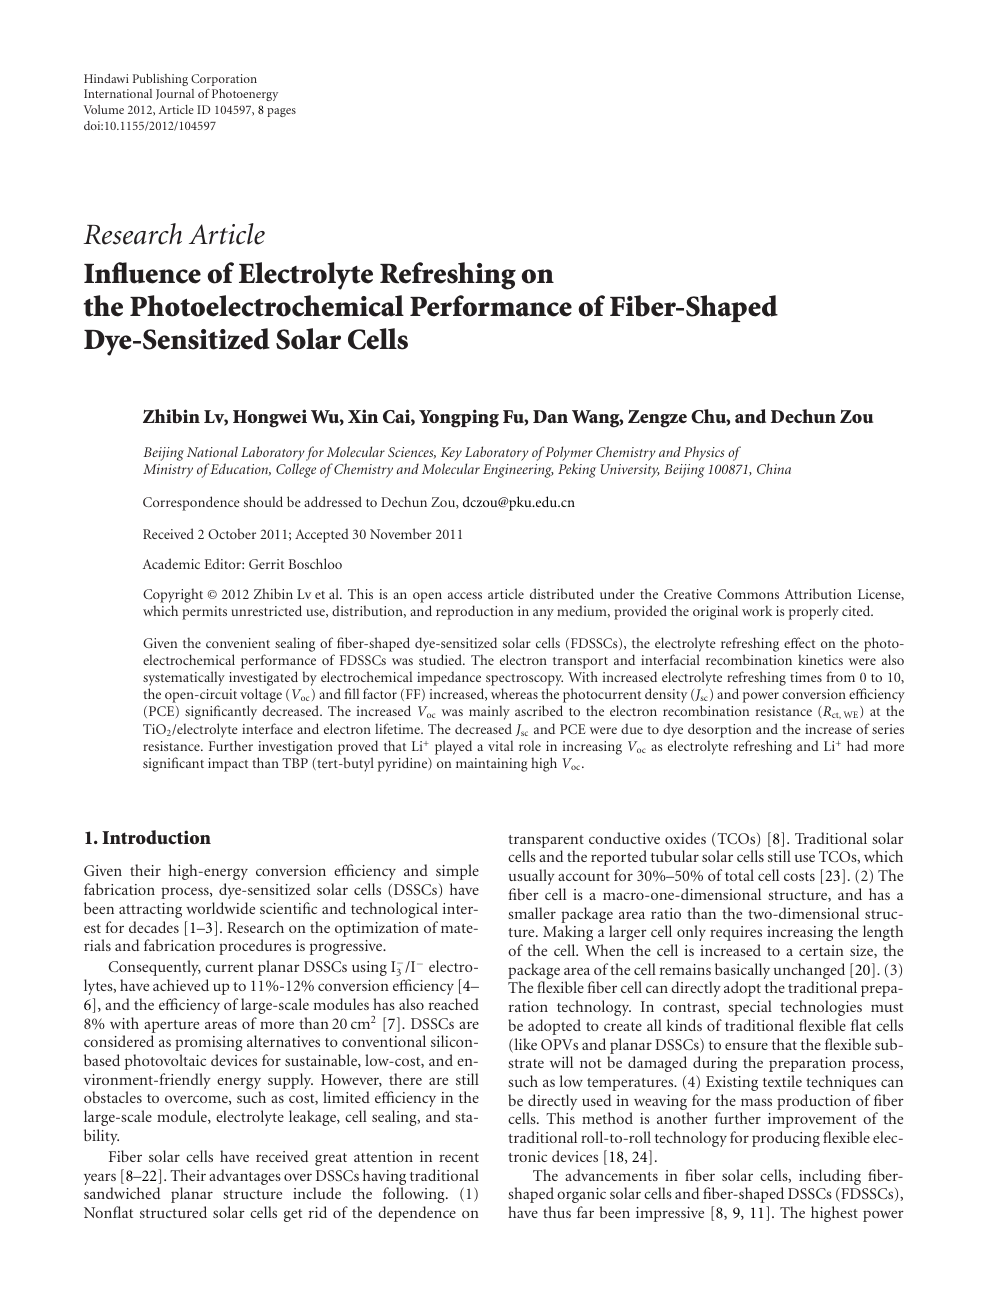 Influence Of Electrolyte Refreshing On The Photoelectrochemical Performance Of Fiber Shaped Dye Sensitized Solar Cells Topic Of Research Paper In Nano Technology Download Scholarly Article Pdf And Read For Free On Cyberleninka Open Science